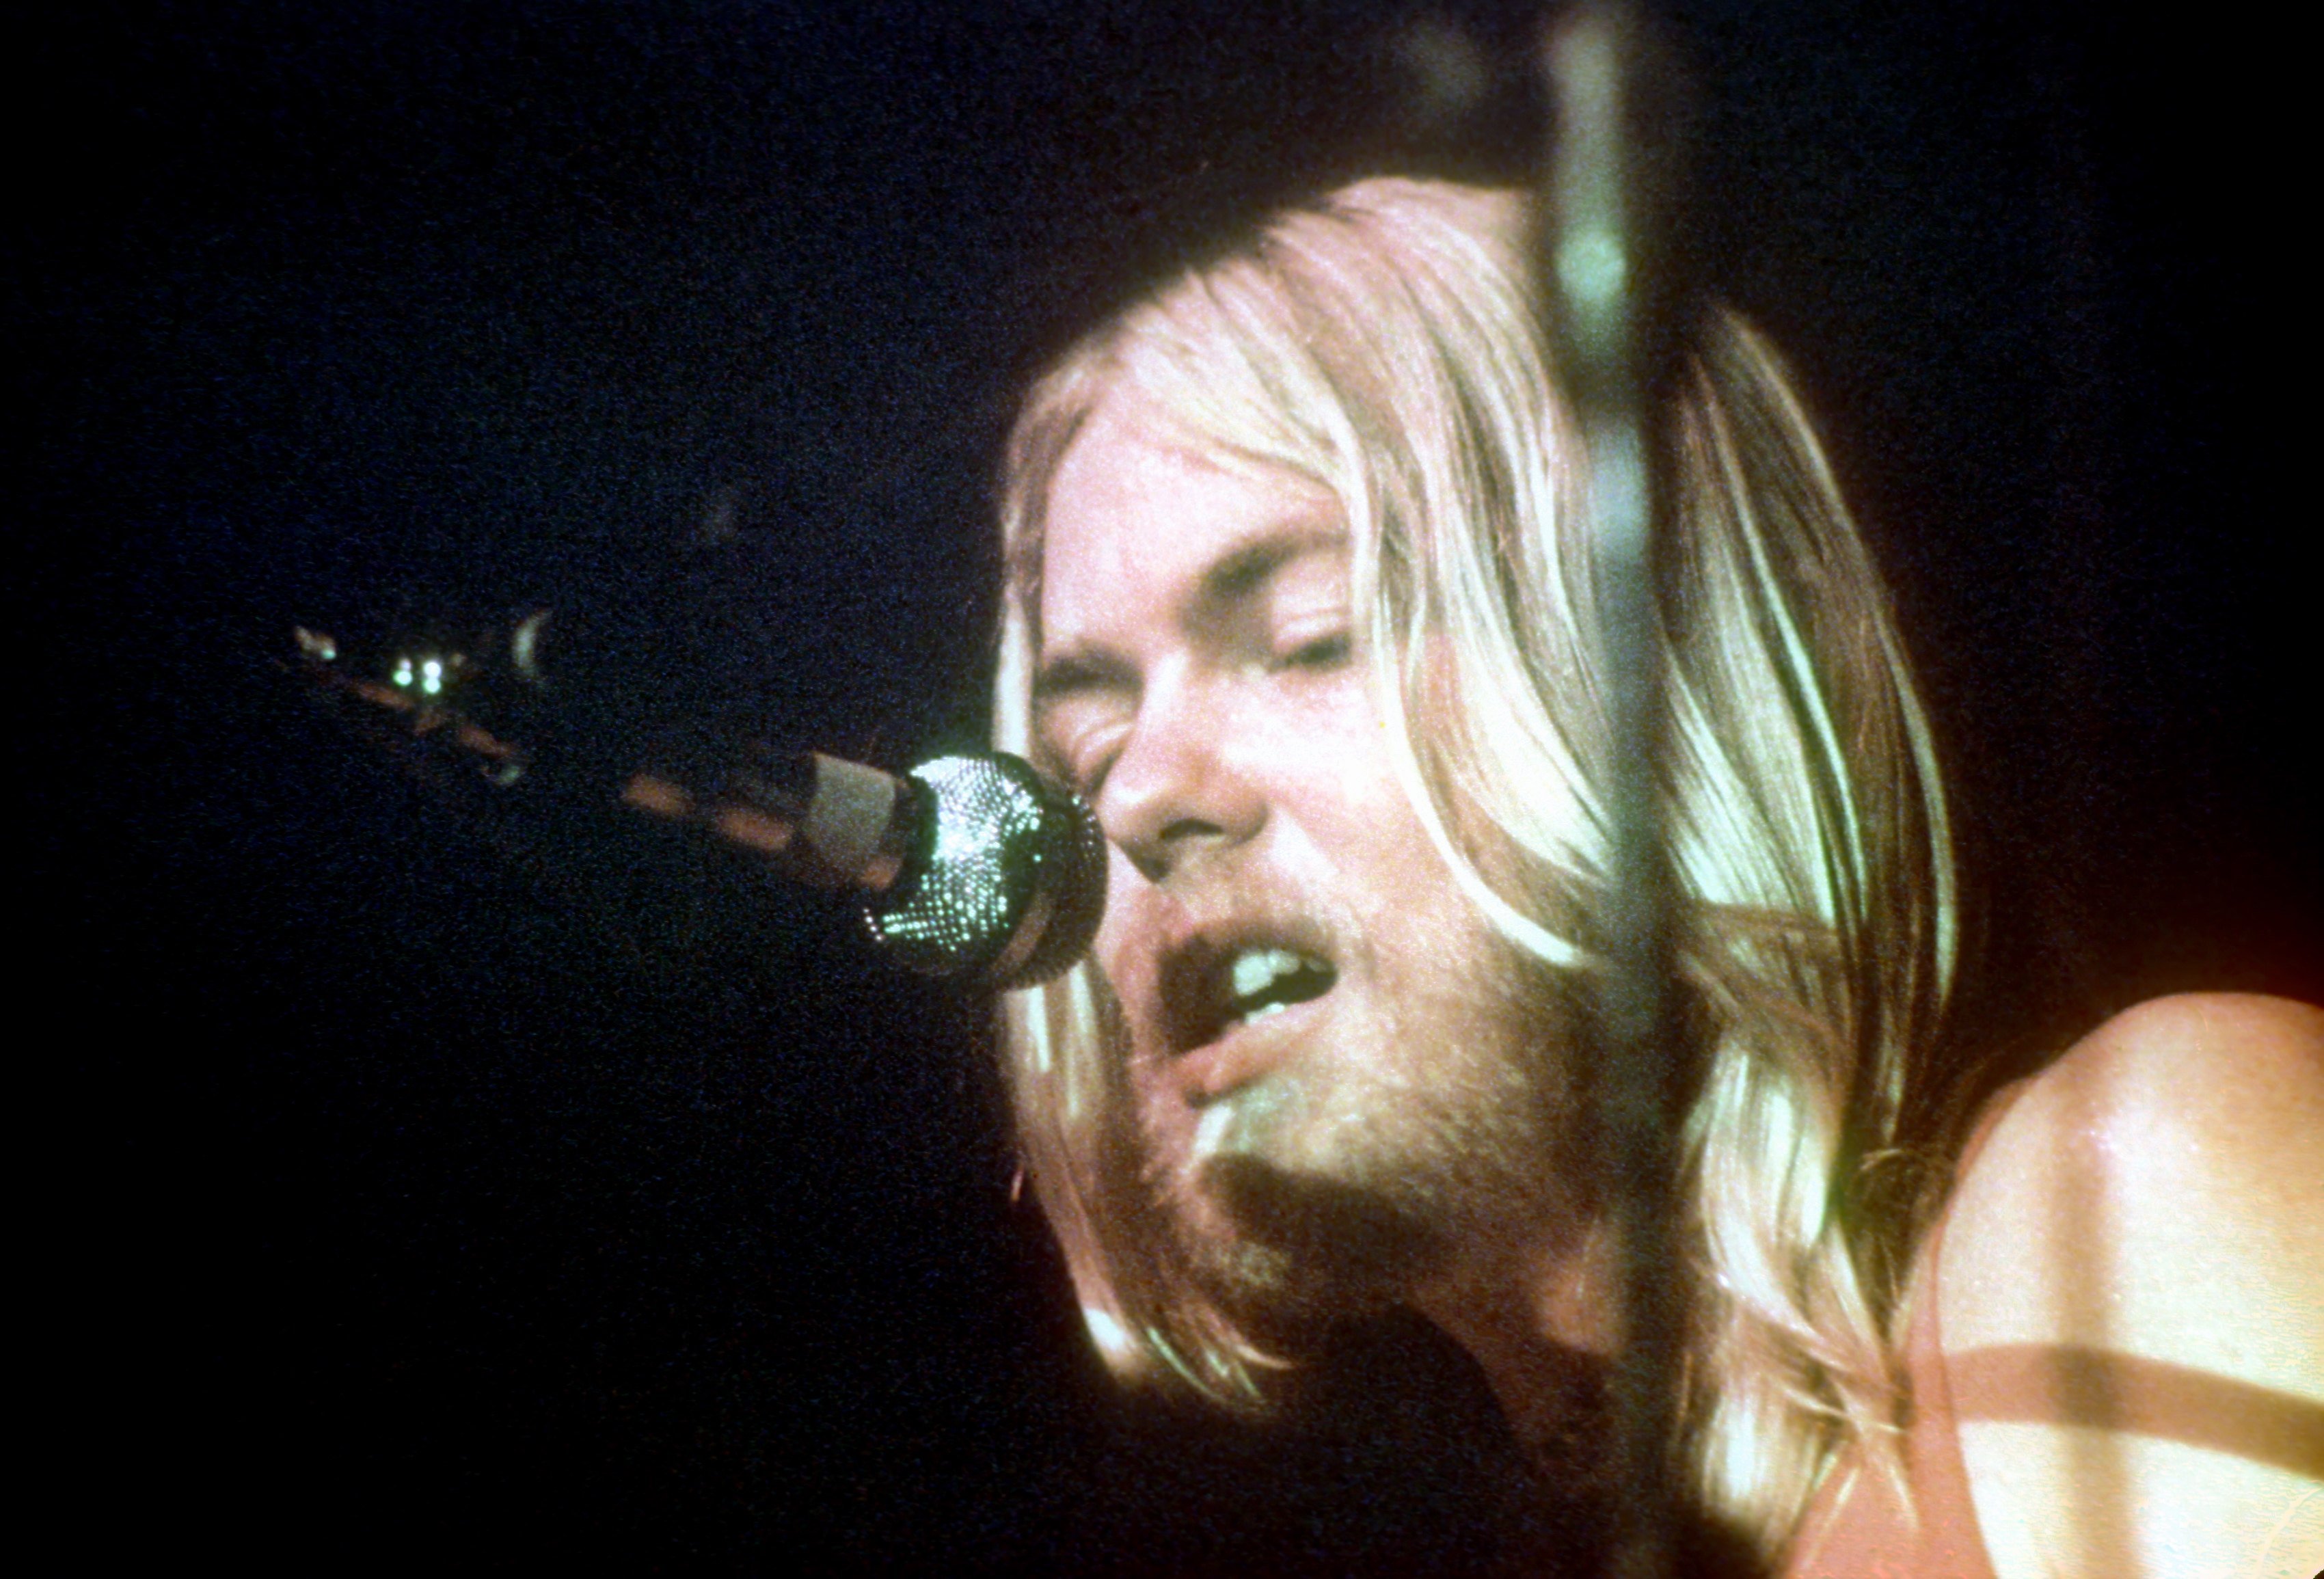 Gregg Allman pictured performing at an unspecified event on September 1, 1972. | Source: Getty Images